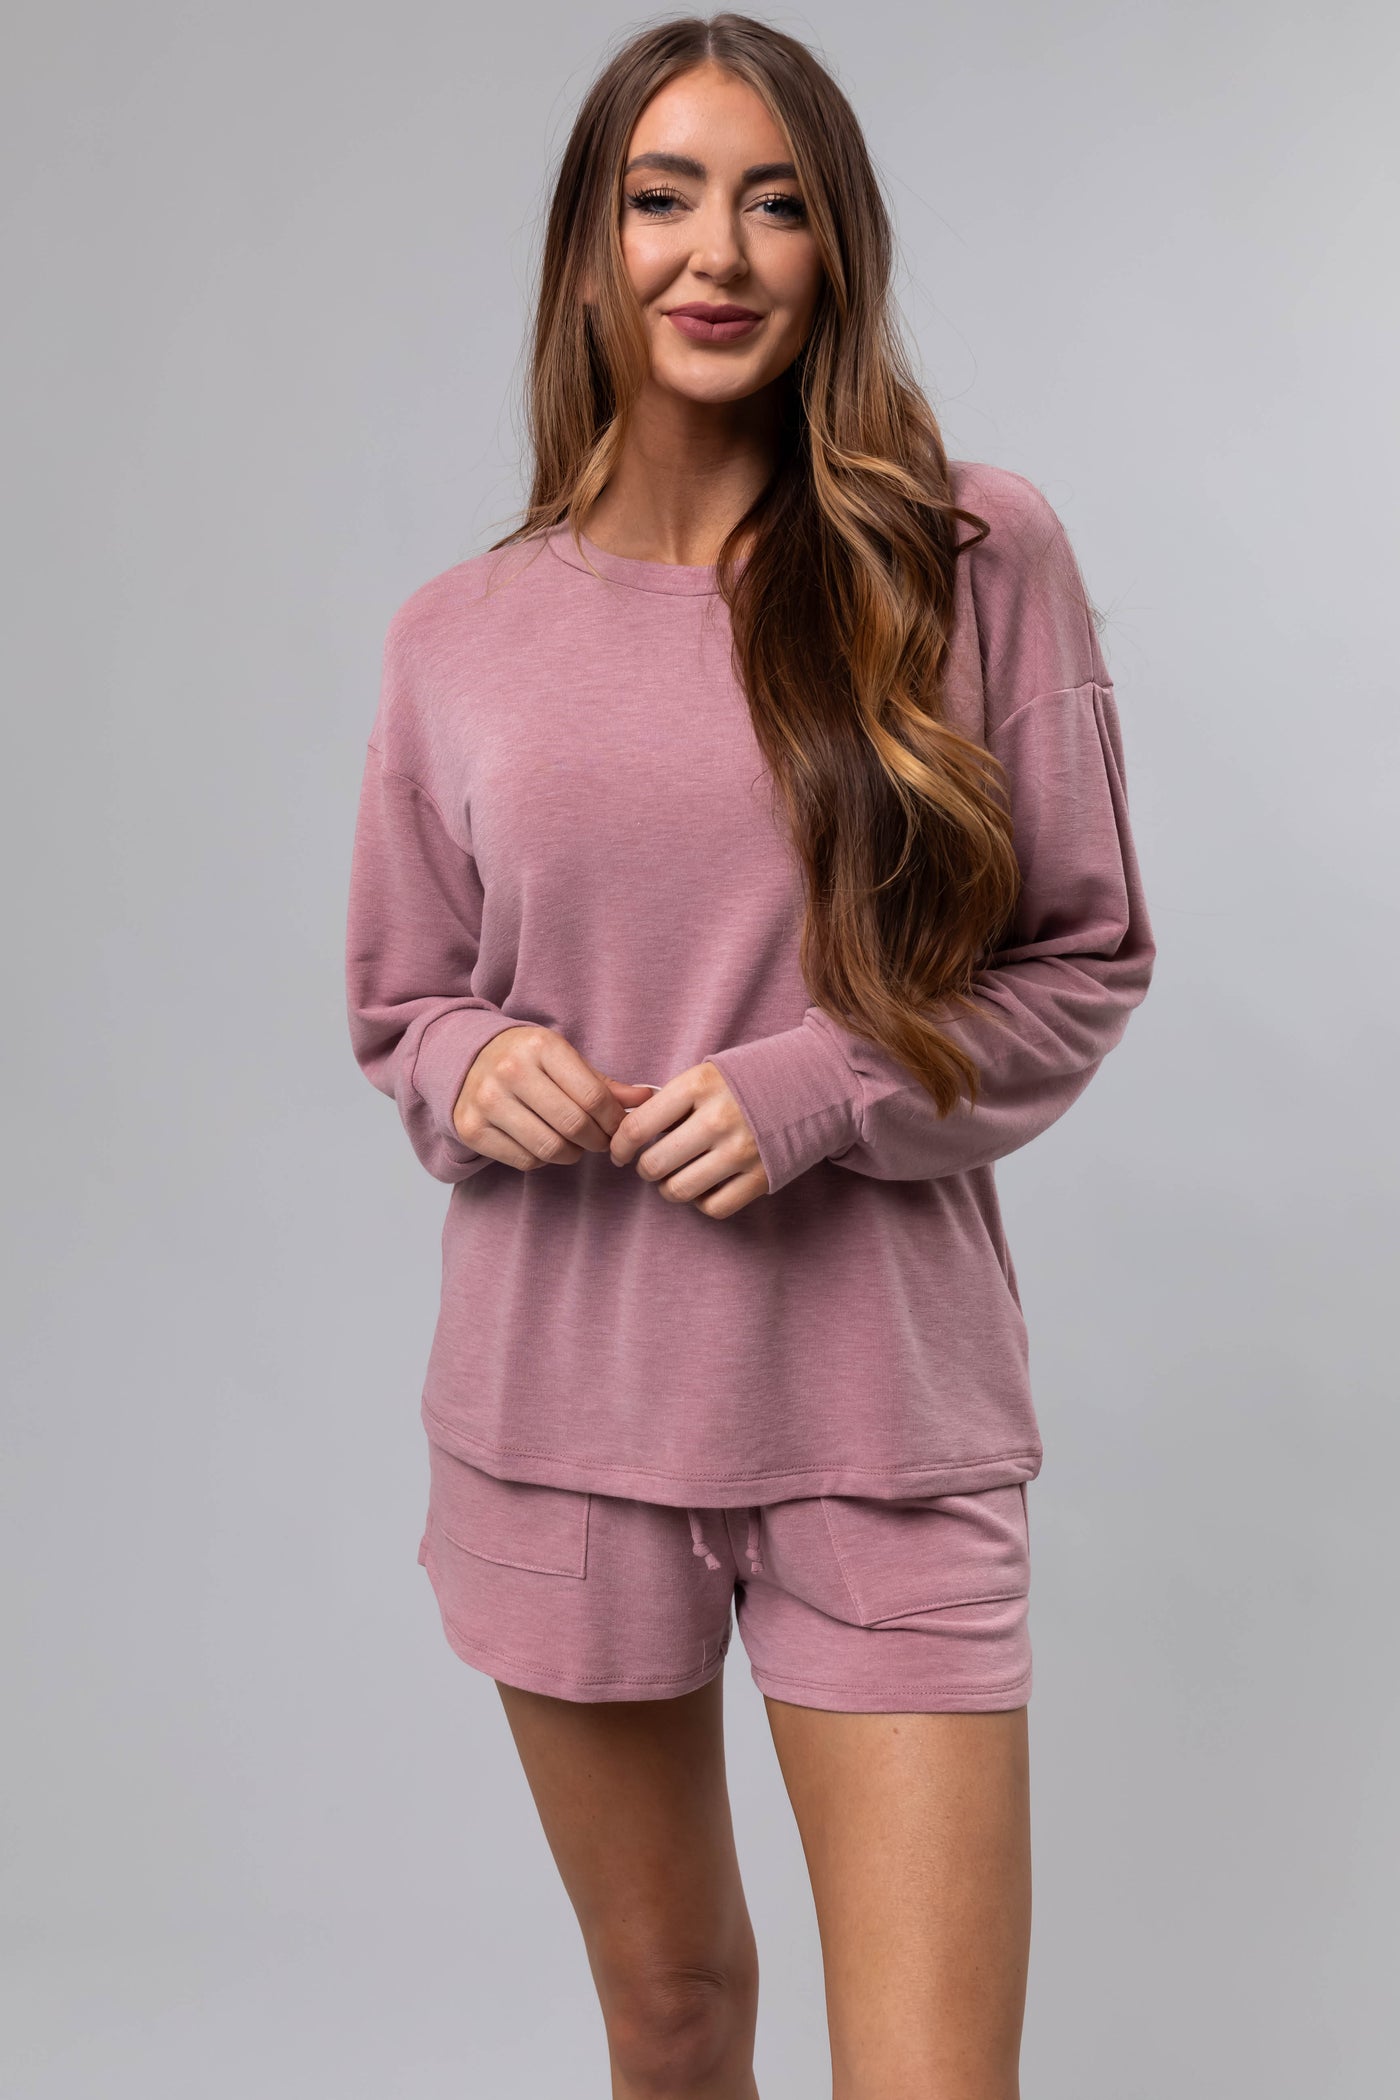 Heathered Rose Long Sleeve Soft Knit Top